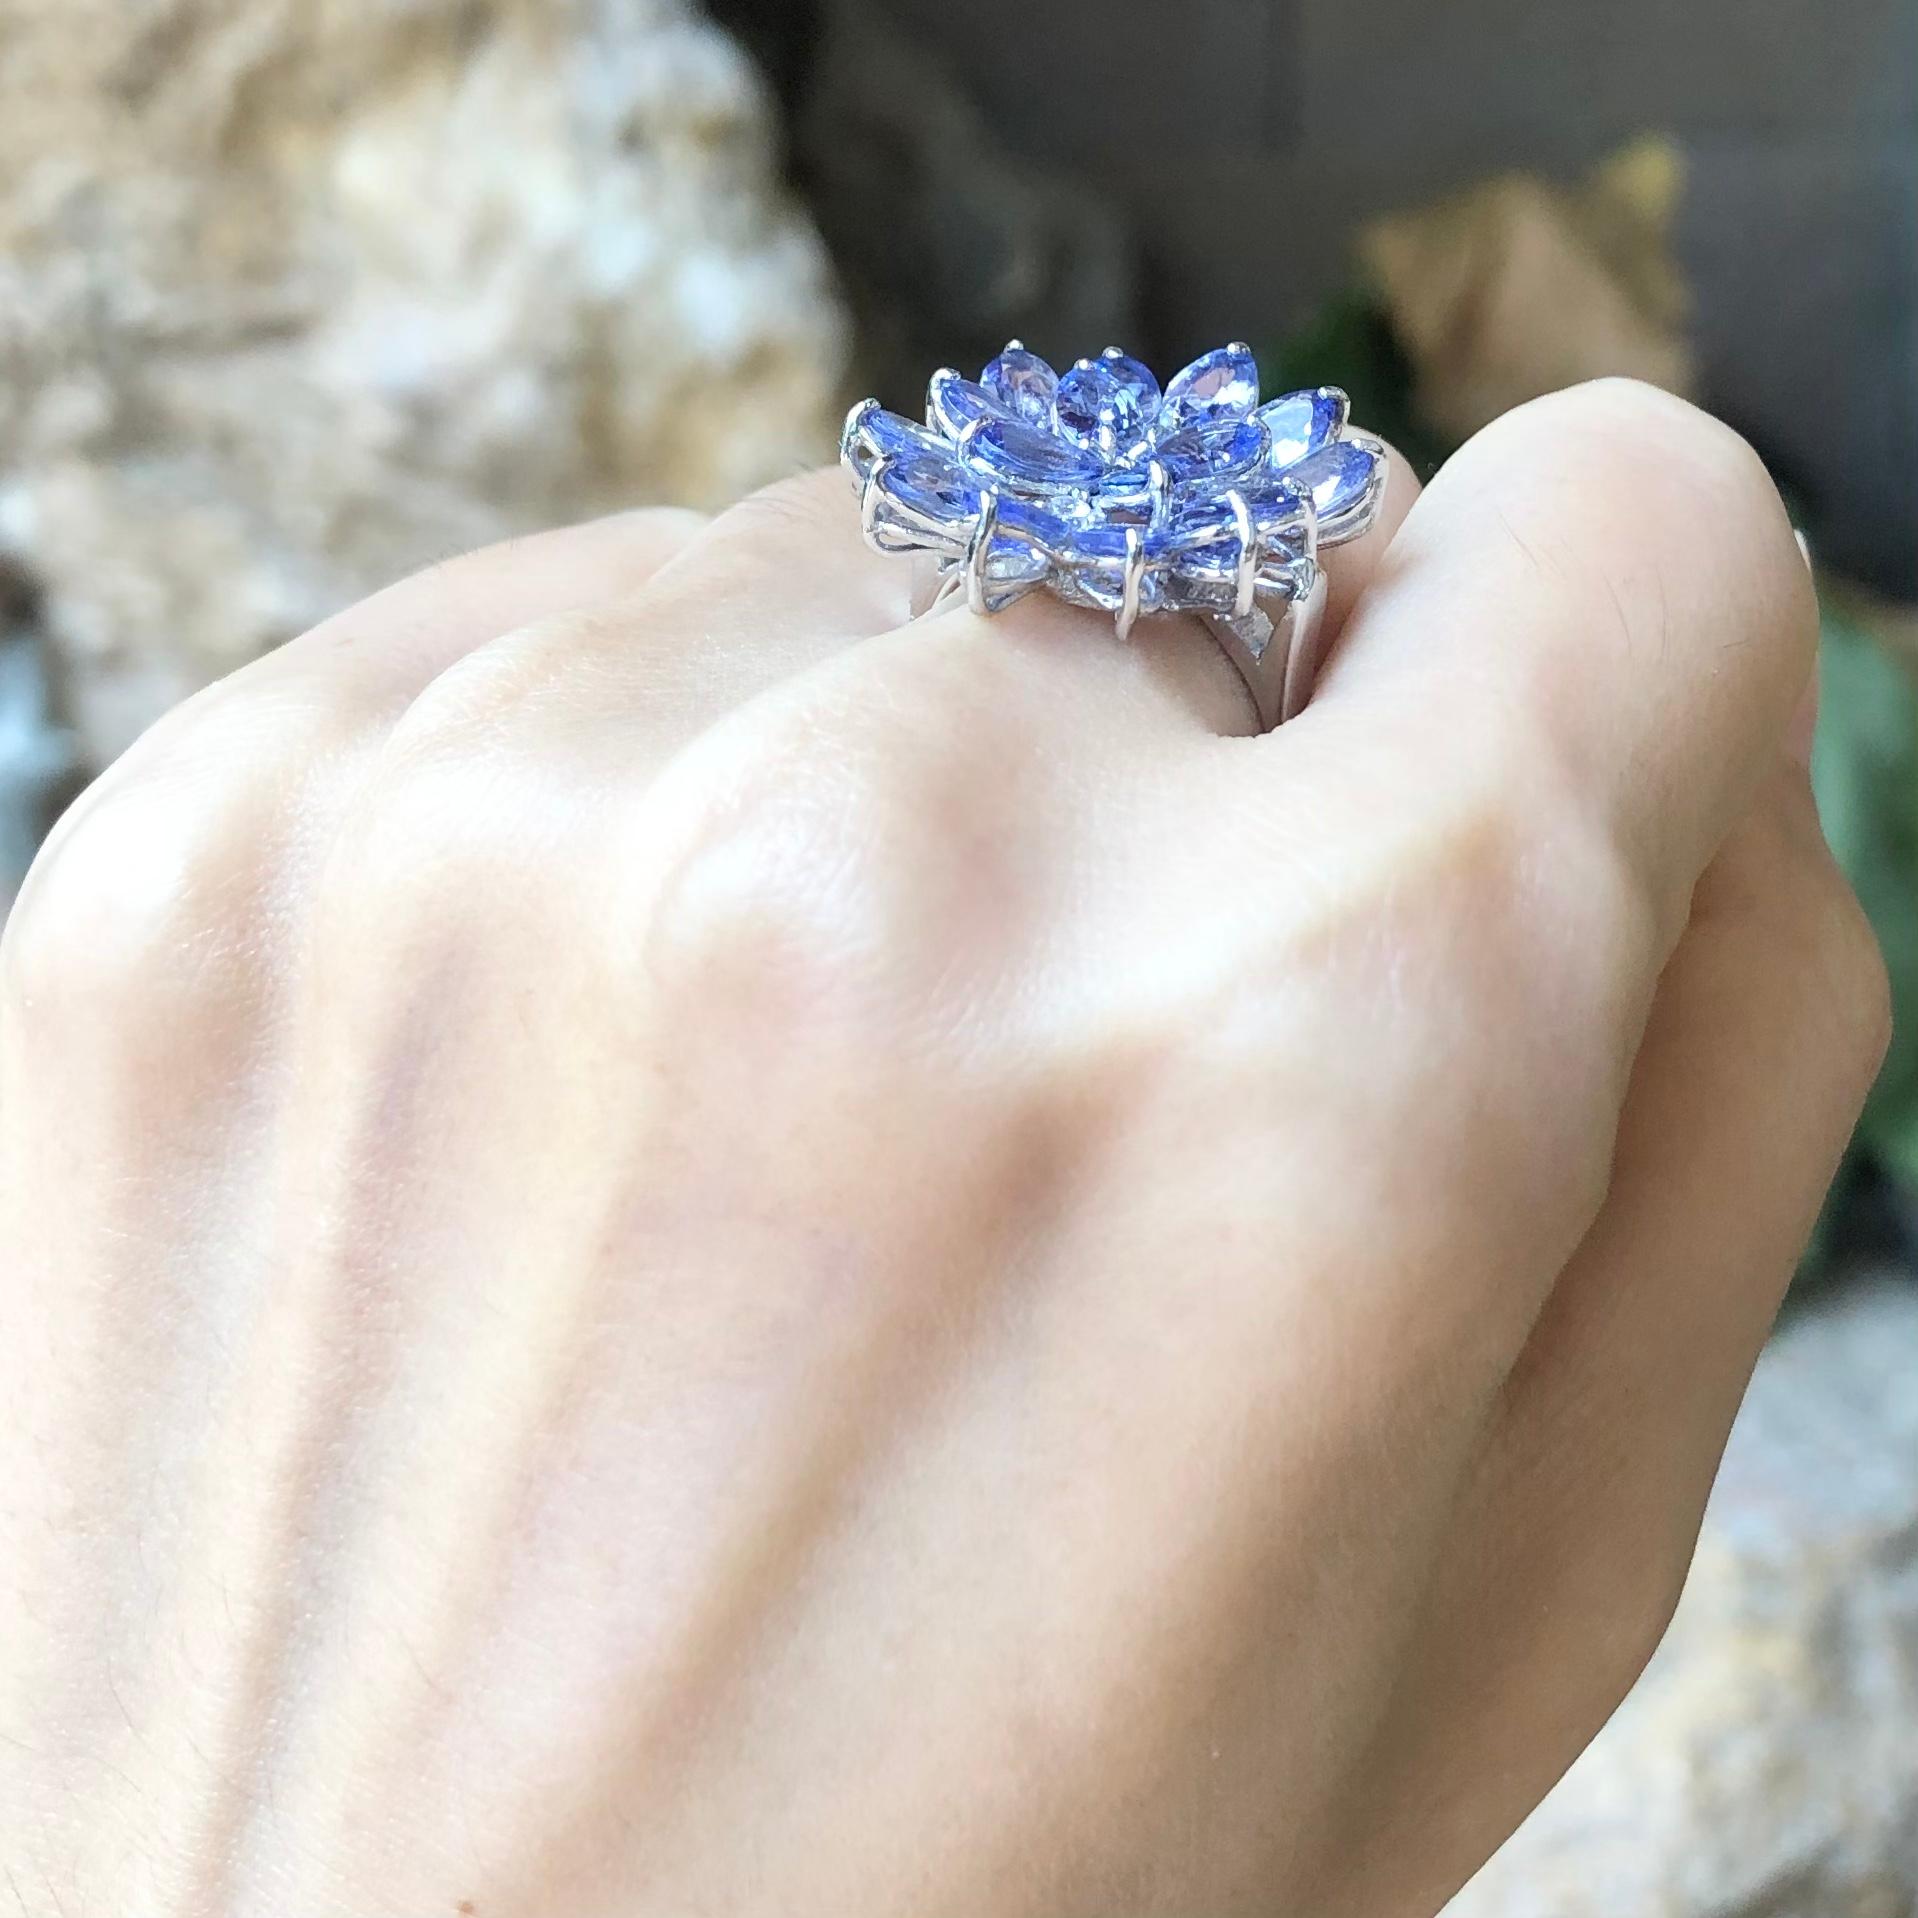 Tanzanite with Cubic Zirconia Ring set in Silver Settings

Width:  2.0 cm 
Length: 2.9 cm
Ring Size: 56
Total Weight: 6.51 grams

*Please note that the silver setting is plated with rhodium to promote shine and help prevent oxidation.  However, with